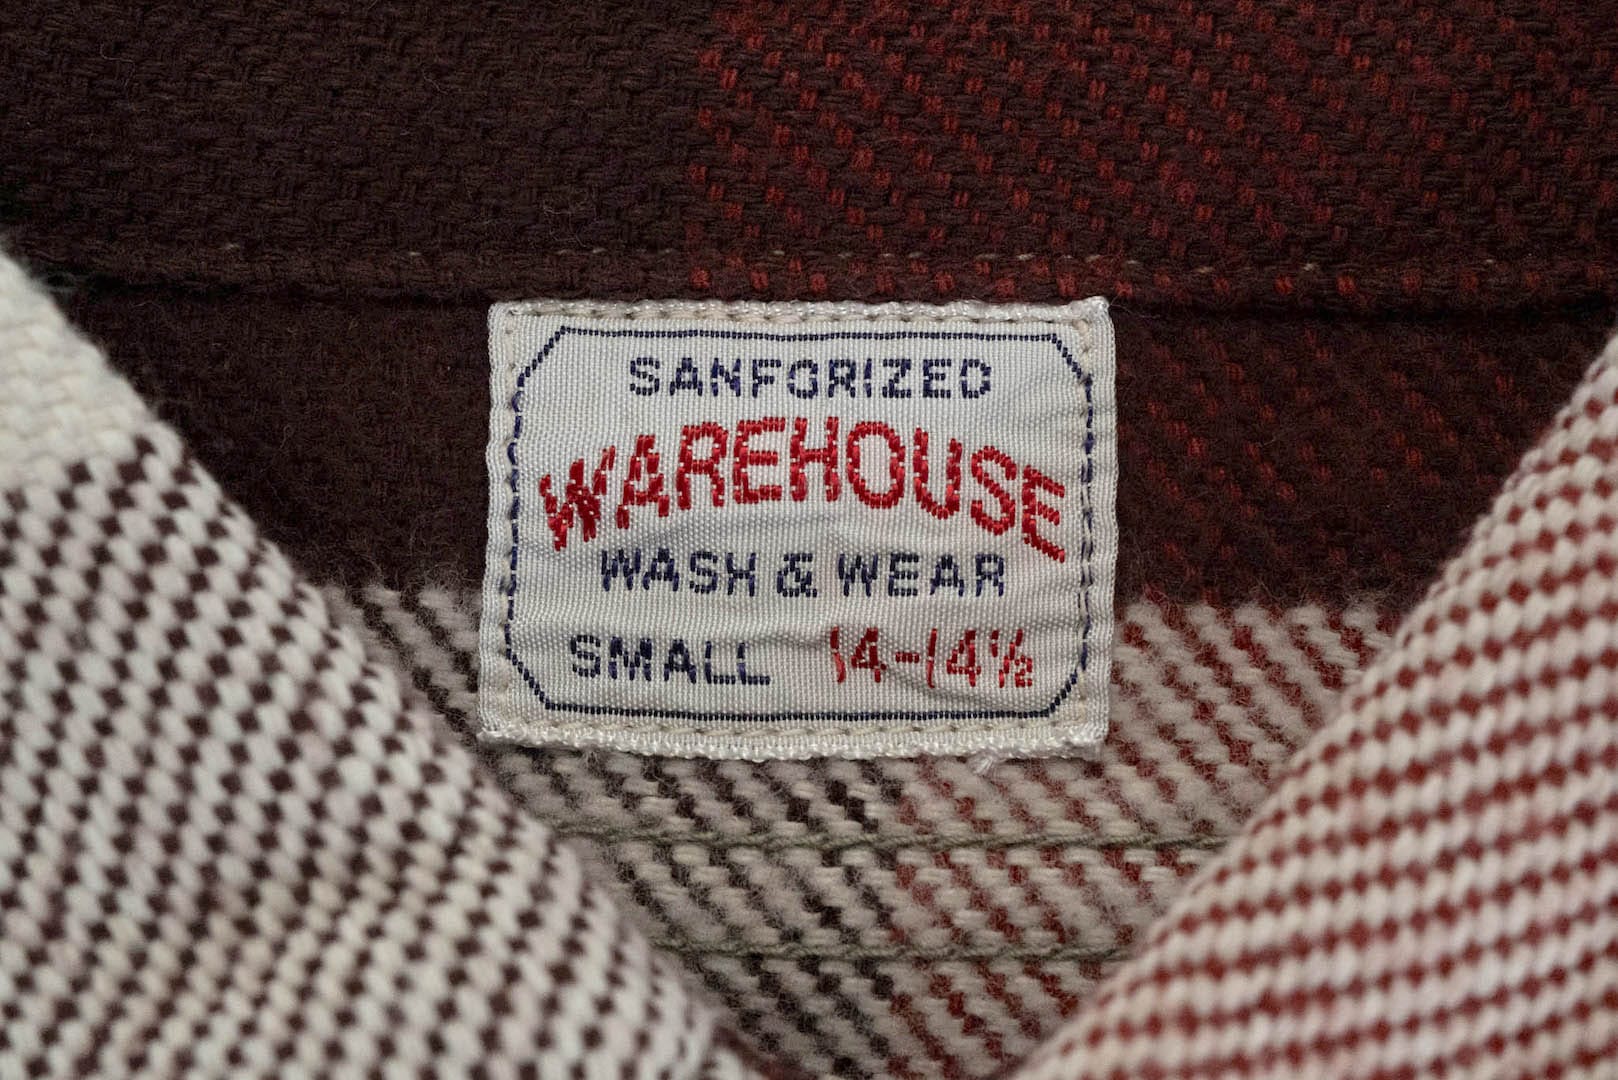 Warehouse 11oz Type D Selvage Flannel Workshirt (Cherry Red)